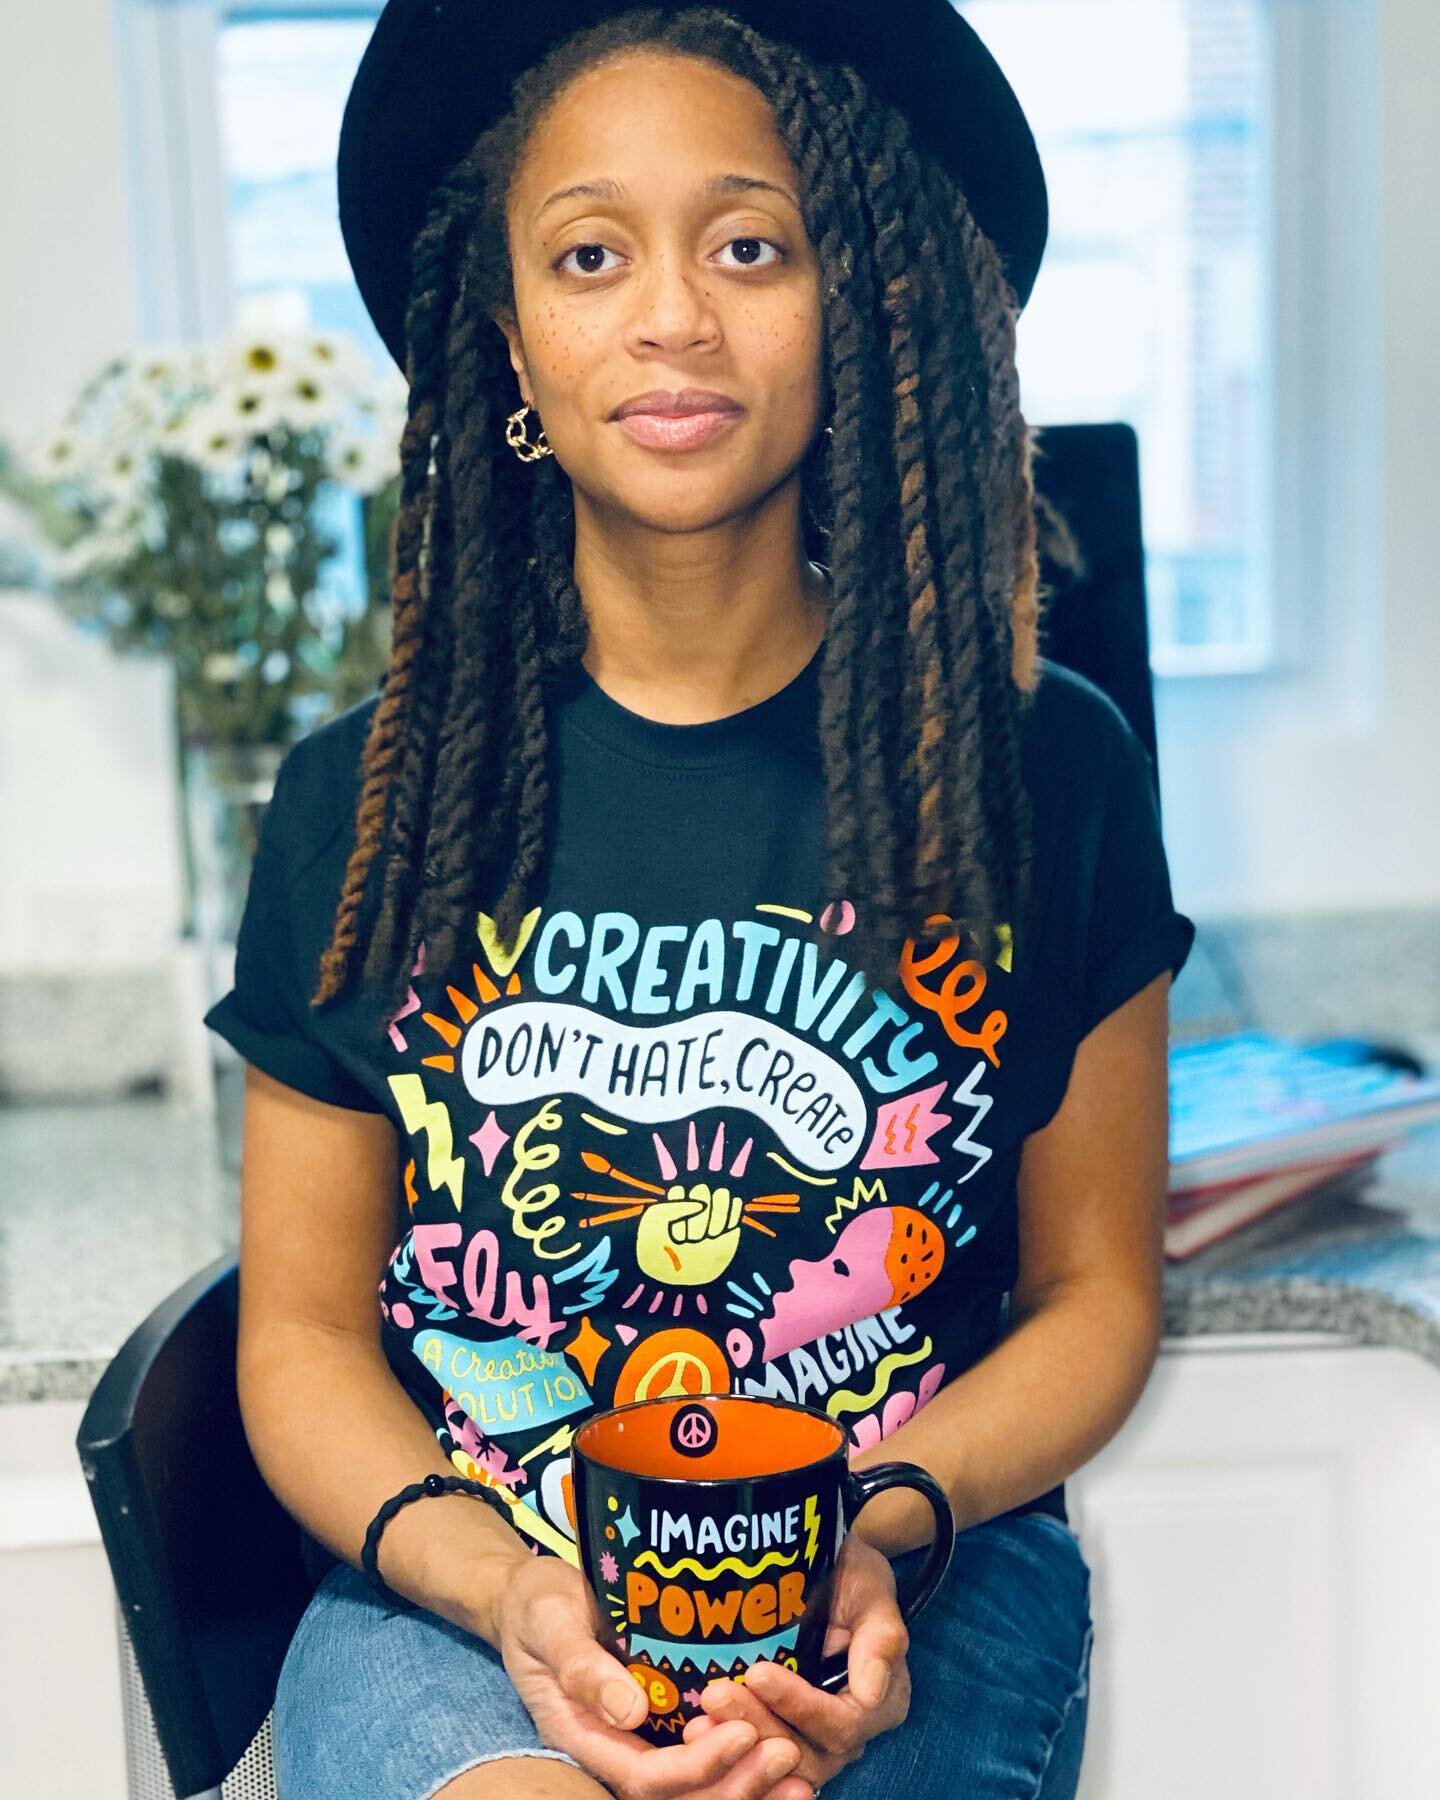 &ldquo;Don&rsquo;t hate, Create.&rdquo;
 
I met @andreapippins over ten years ago, in Port Authority at the bus stop going home from NYC. I was an instant fan. Still am today. She had a blog back then... but now she has so much more, and you can find